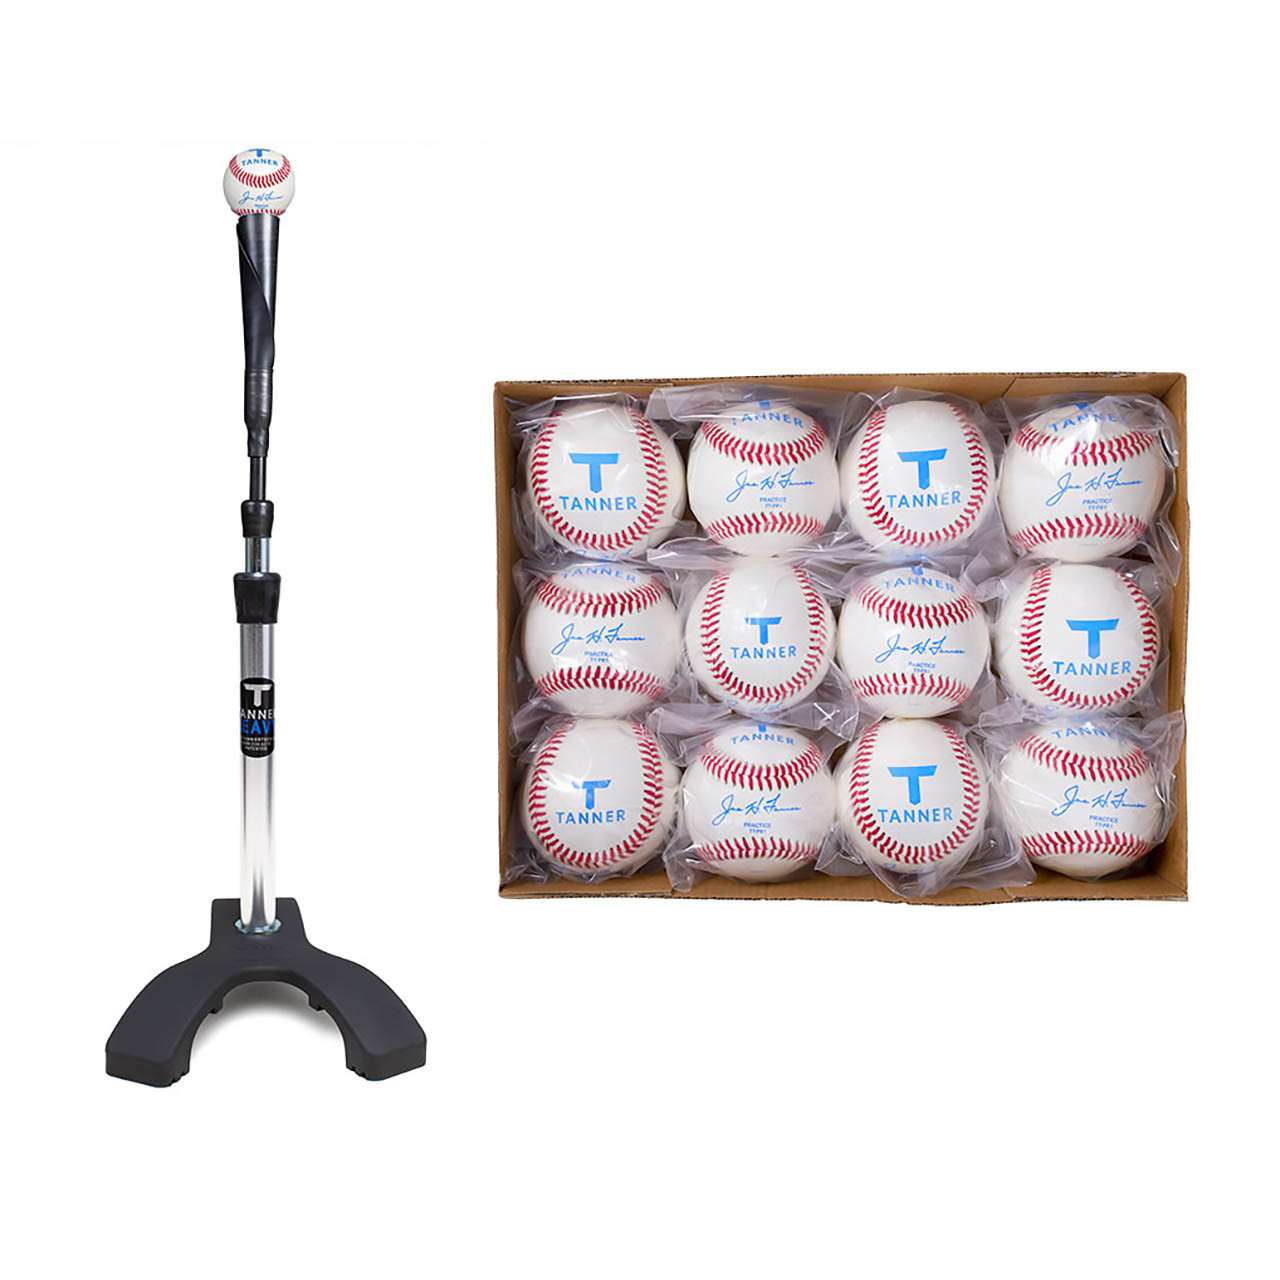 SAVE with Choice of Tanner Batting Tee & Practice Baseballs